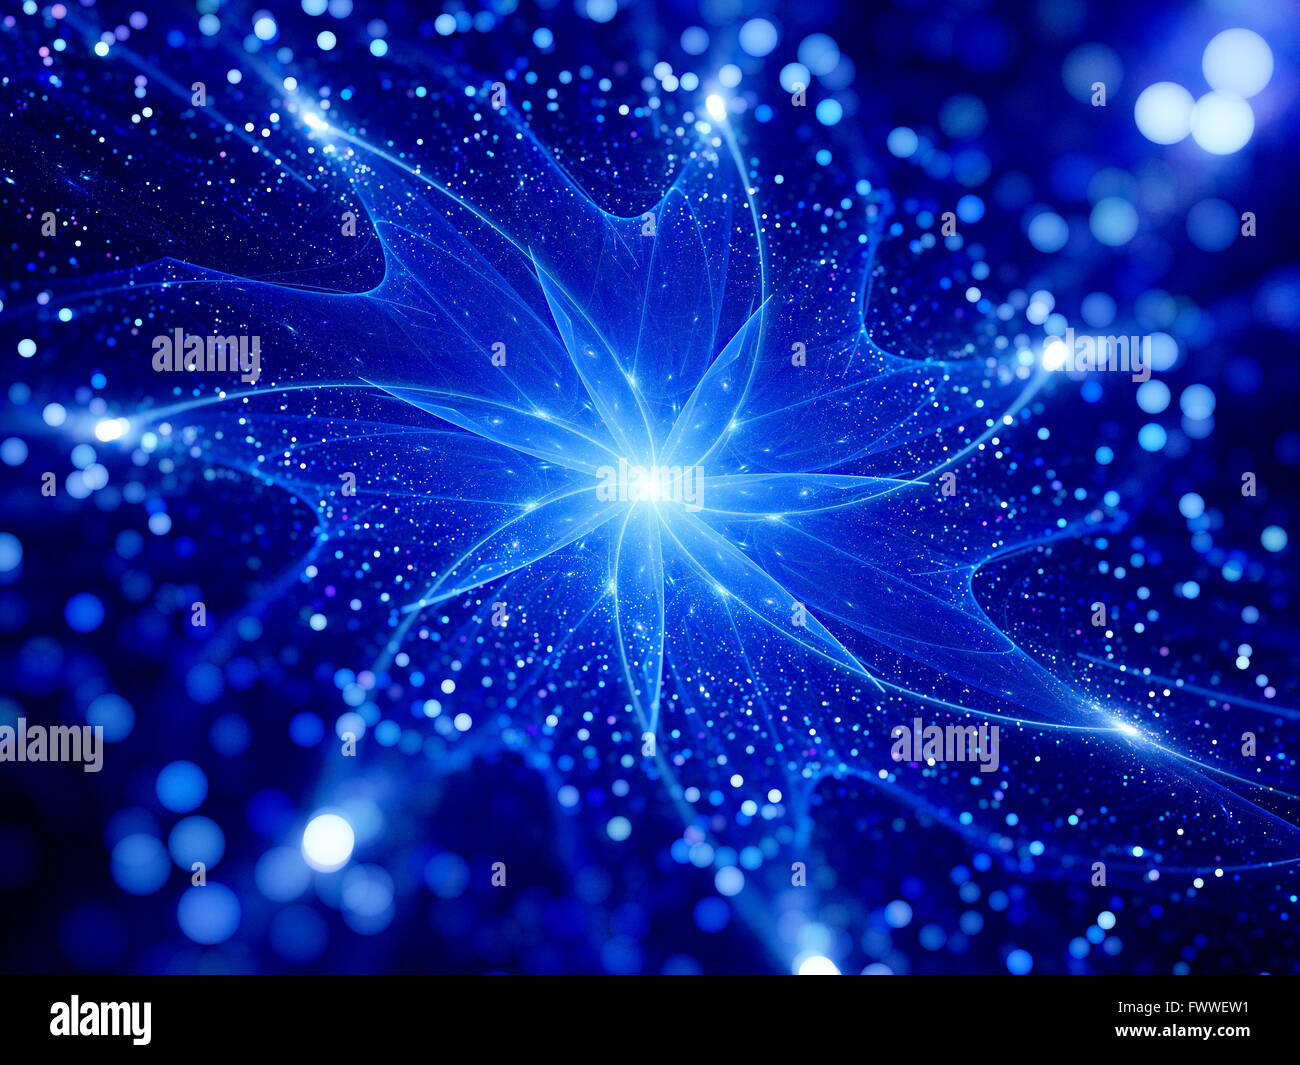 Magical glowing star, fractal artwork, computer generated abstract background Stock Photo